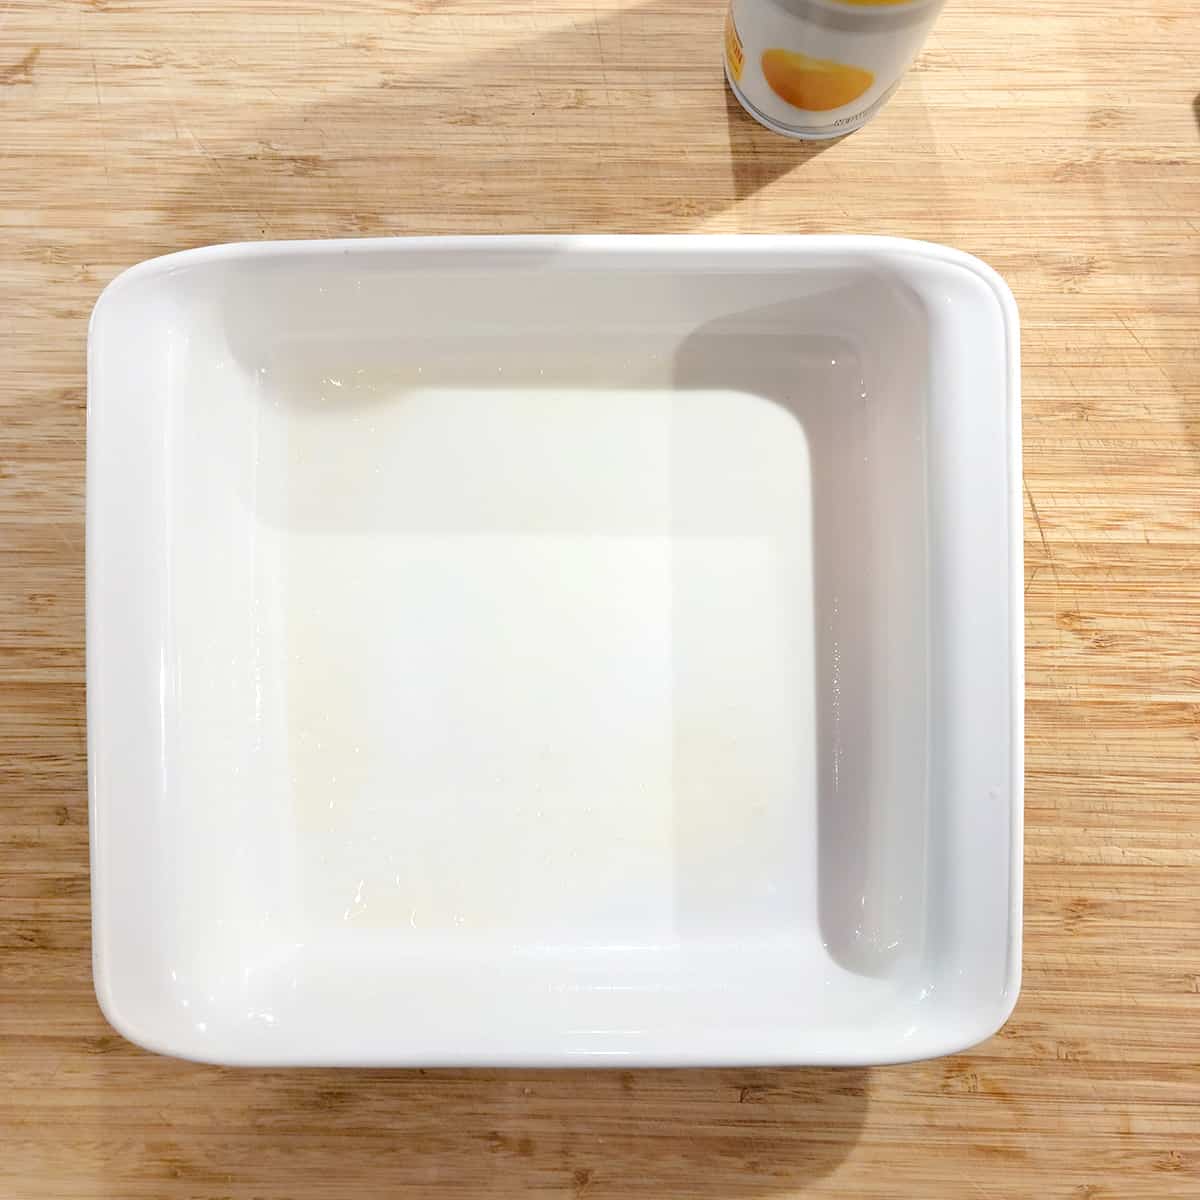 Square baking dish sprayed with cooking spray.